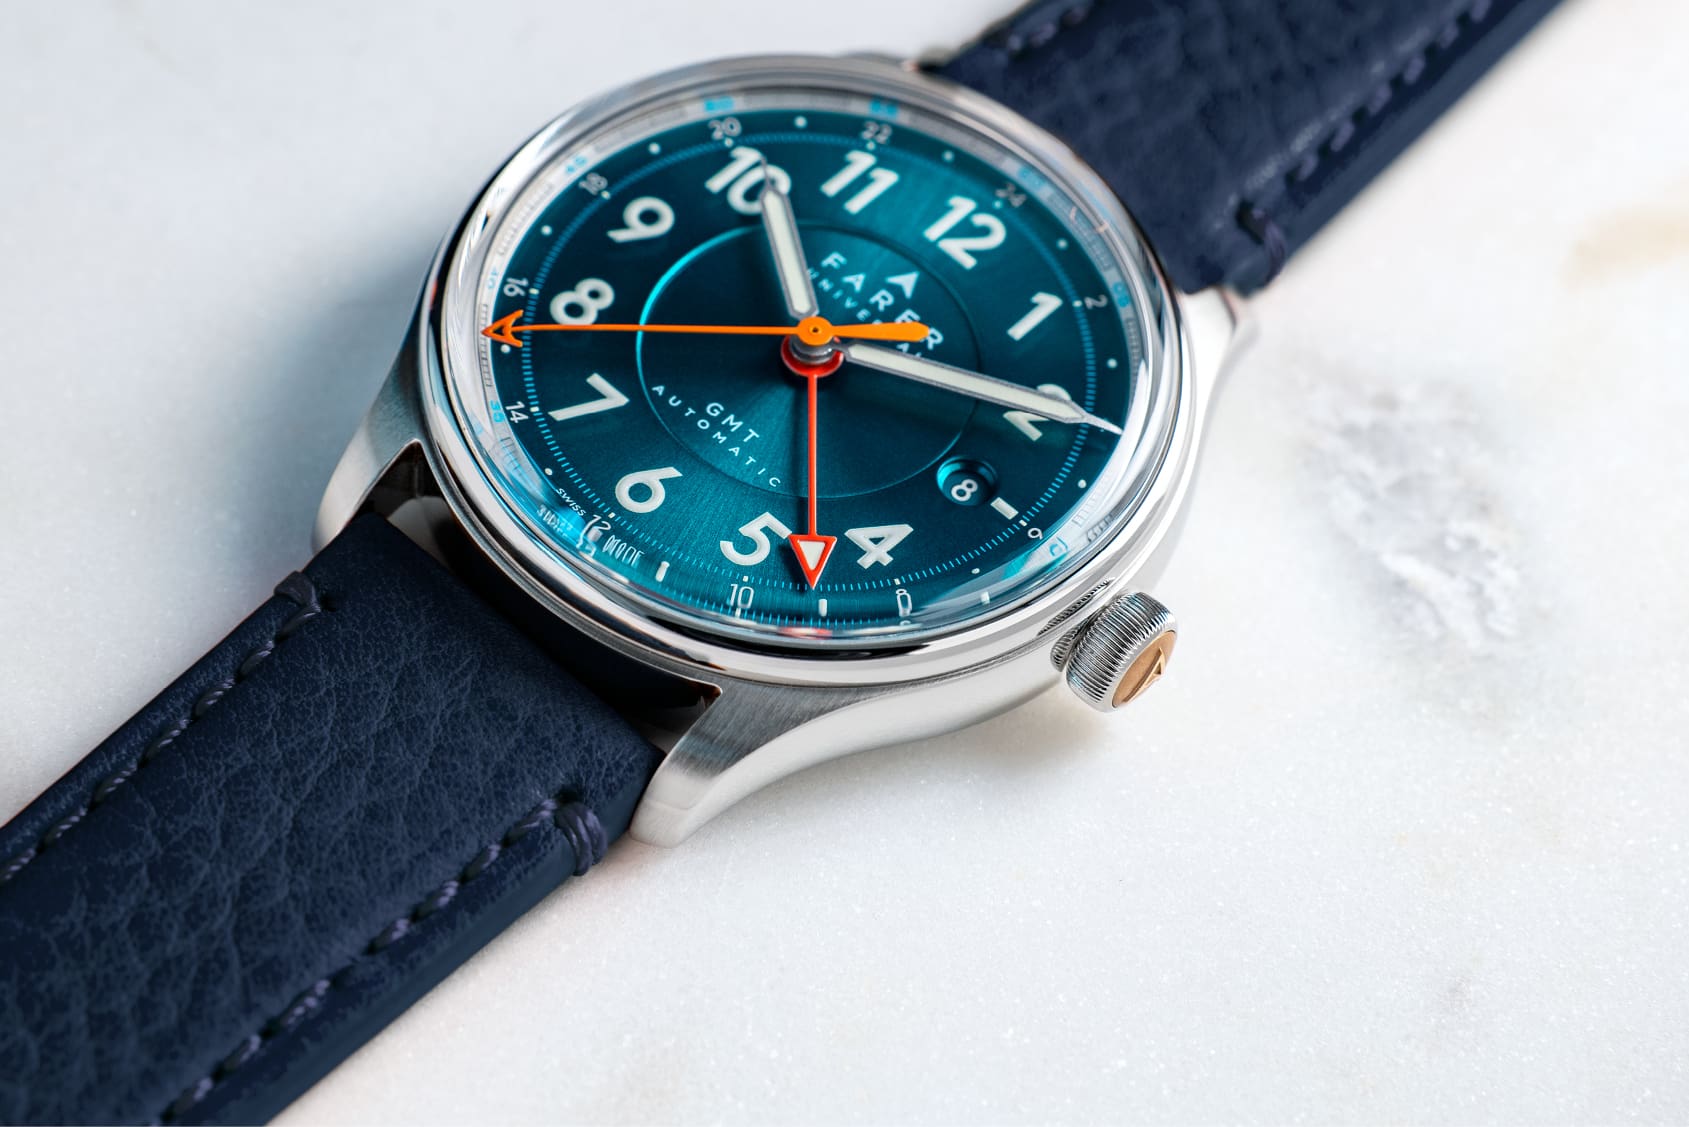 INTRODUCING: The Farer Lander IV GMT puts a British twist on a classic watch